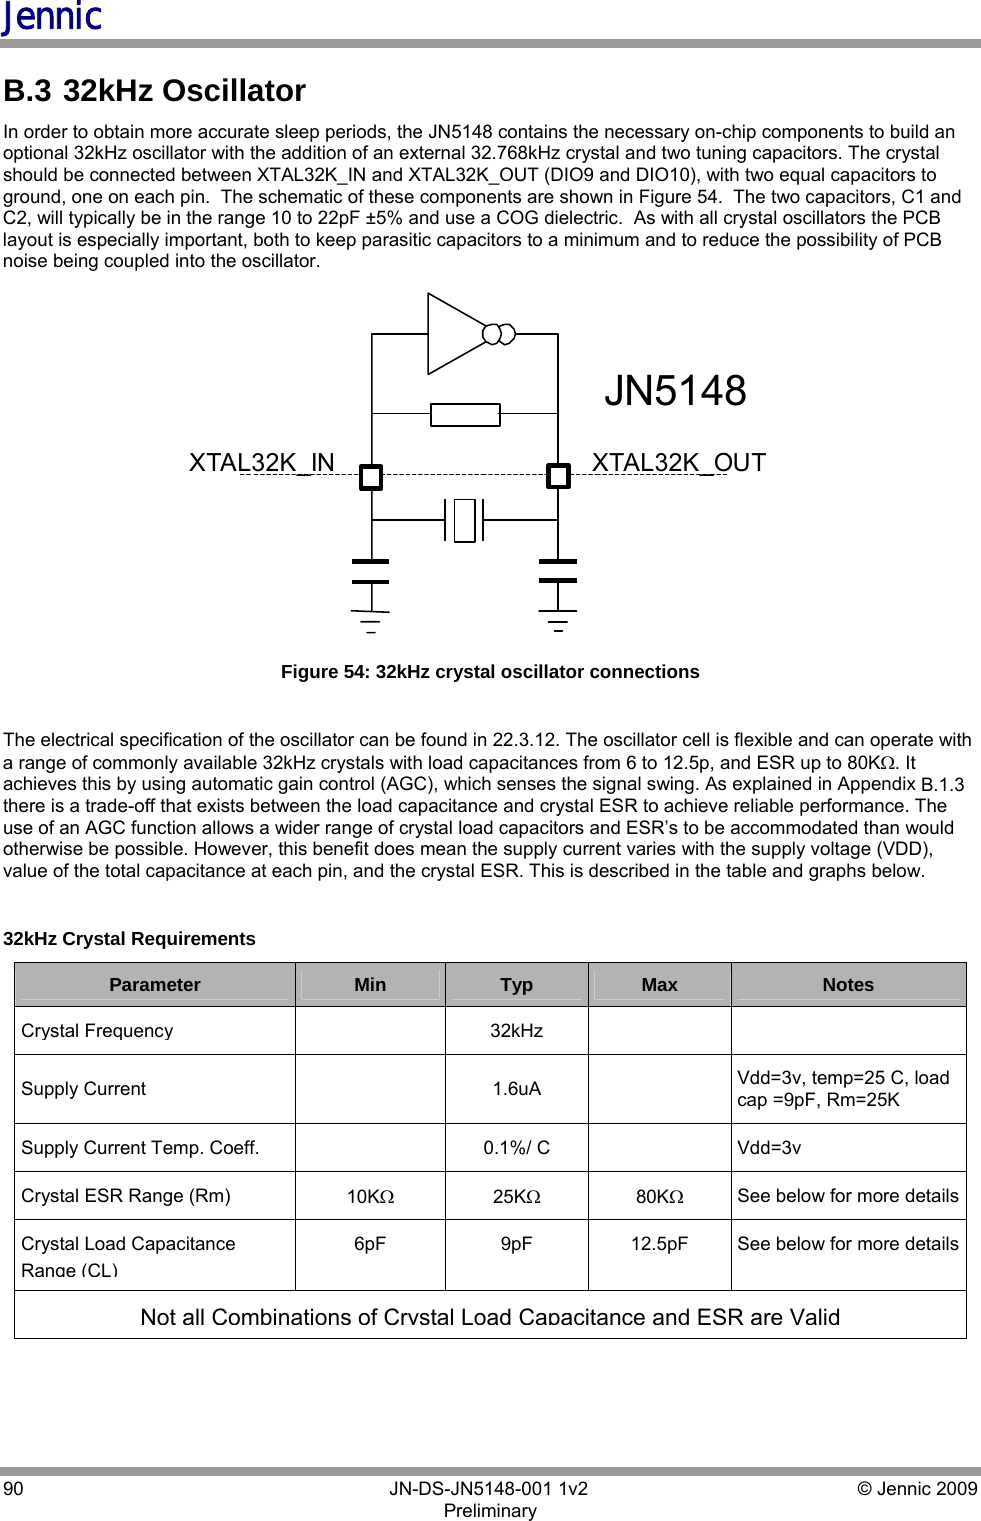 Jennic 90        JN-DS-JN5148-001 1v2  © Jennic 2009 Preliminary    B.3  32kHz Oscillator In order to obtain more accurate sleep periods, the JN5148 contains the necessary on-chip components to build an optional 32kHz oscillator with the addition of an external 32.768kHz crystal and two tuning capacitors. The crystal should be connected between XTAL32K_IN and XTAL32K_OUT (DIO9 and DIO10), with two equal capacitors to ground, one on each pin.  The schematic of these components are shown in Figure 54.  The two capacitors, C1 and C2, will typically be in the range 10 to 22pF ±5% and use a COG dielectric.  As with all crystal oscillators the PCB layout is especially important, both to keep parasitic capacitors to a minimum and to reduce the possibility of PCB noise being coupled into the oscillator. XTAL32K_OUT XTAL32K_IN JN5148  Figure 54: 32kHz crystal oscillator connections  The electrical specification of the oscillator can be found in 22.3.12. The oscillator cell is flexible and can operate with a range of commonly available 32kHz crystals with load capacitances from 6 to 12.5p, and ESR up to 80KΩ. It achieves this by using automatic gain control (AGC), which senses the signal swing. As explained in Appendix B.1.3 there is a trade-off that exists between the load capacitance and crystal ESR to achieve reliable performance. The use of an AGC function allows a wider range of crystal load capacitors and ESR’s to be accommodated than would otherwise be possible. However, this benefit does mean the supply current varies with the supply voltage (VDD), value of the total capacitance at each pin, and the crystal ESR. This is described in the table and graphs below.  32kHz Crystal Requirements Parameter  Min  Typ  Max  Notes Crystal Frequency 32kHzSupply Current    1.6uA    Vdd=3v, temp=25 C, load cap =9pF, Rm=25K Supply Current Temp. Coeff.  0.1%/ C Vdd=3v Crystal ESR Range (Rm) 10KΩ25KΩ80KΩSee below for more detailsCrystal Load Capacitance  Range (CL)6pF  9pF  12.5pF  See below for more detailsNot all Combinations of Crystal Load Capacitance and ESR are Valid 